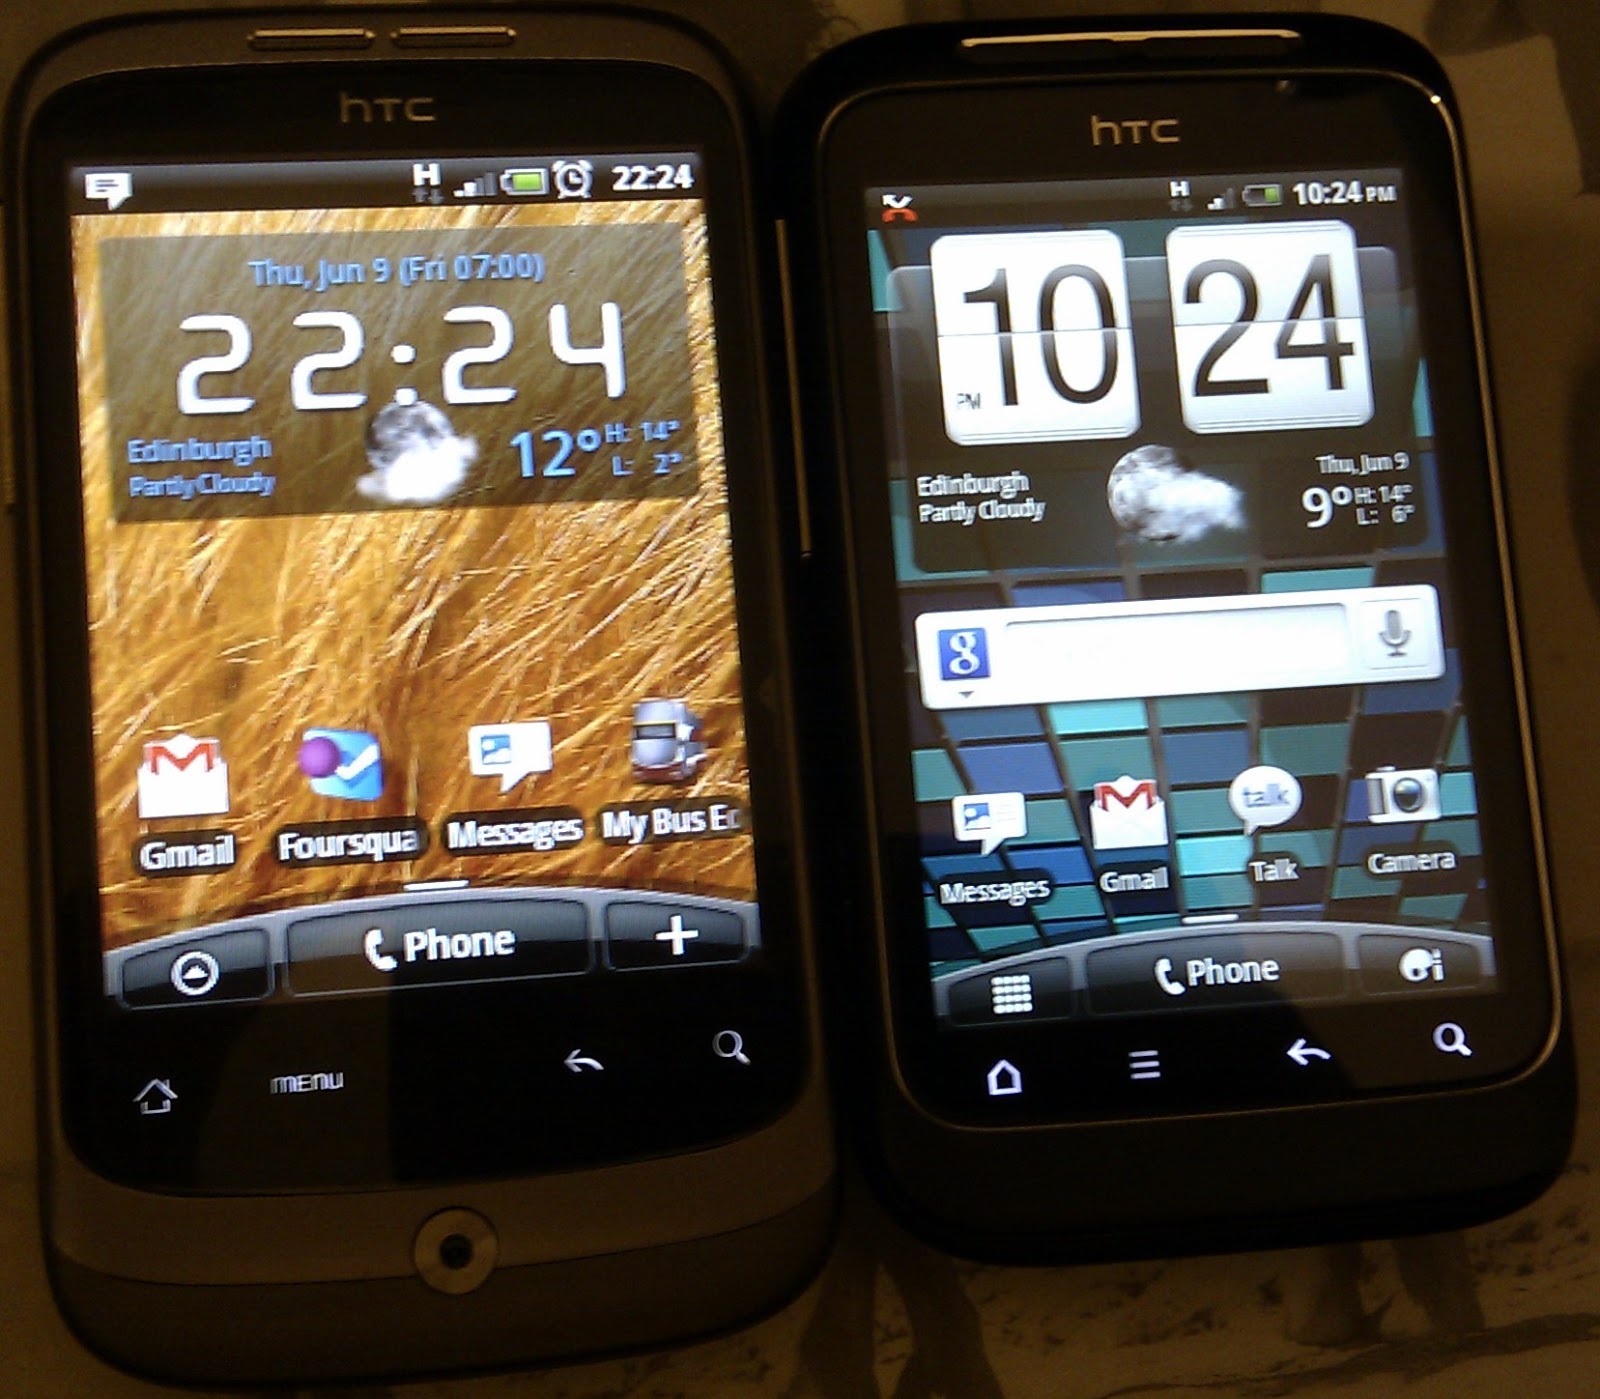 Htc Wildfire Versus Htc Wildfire S - informed is forearmed